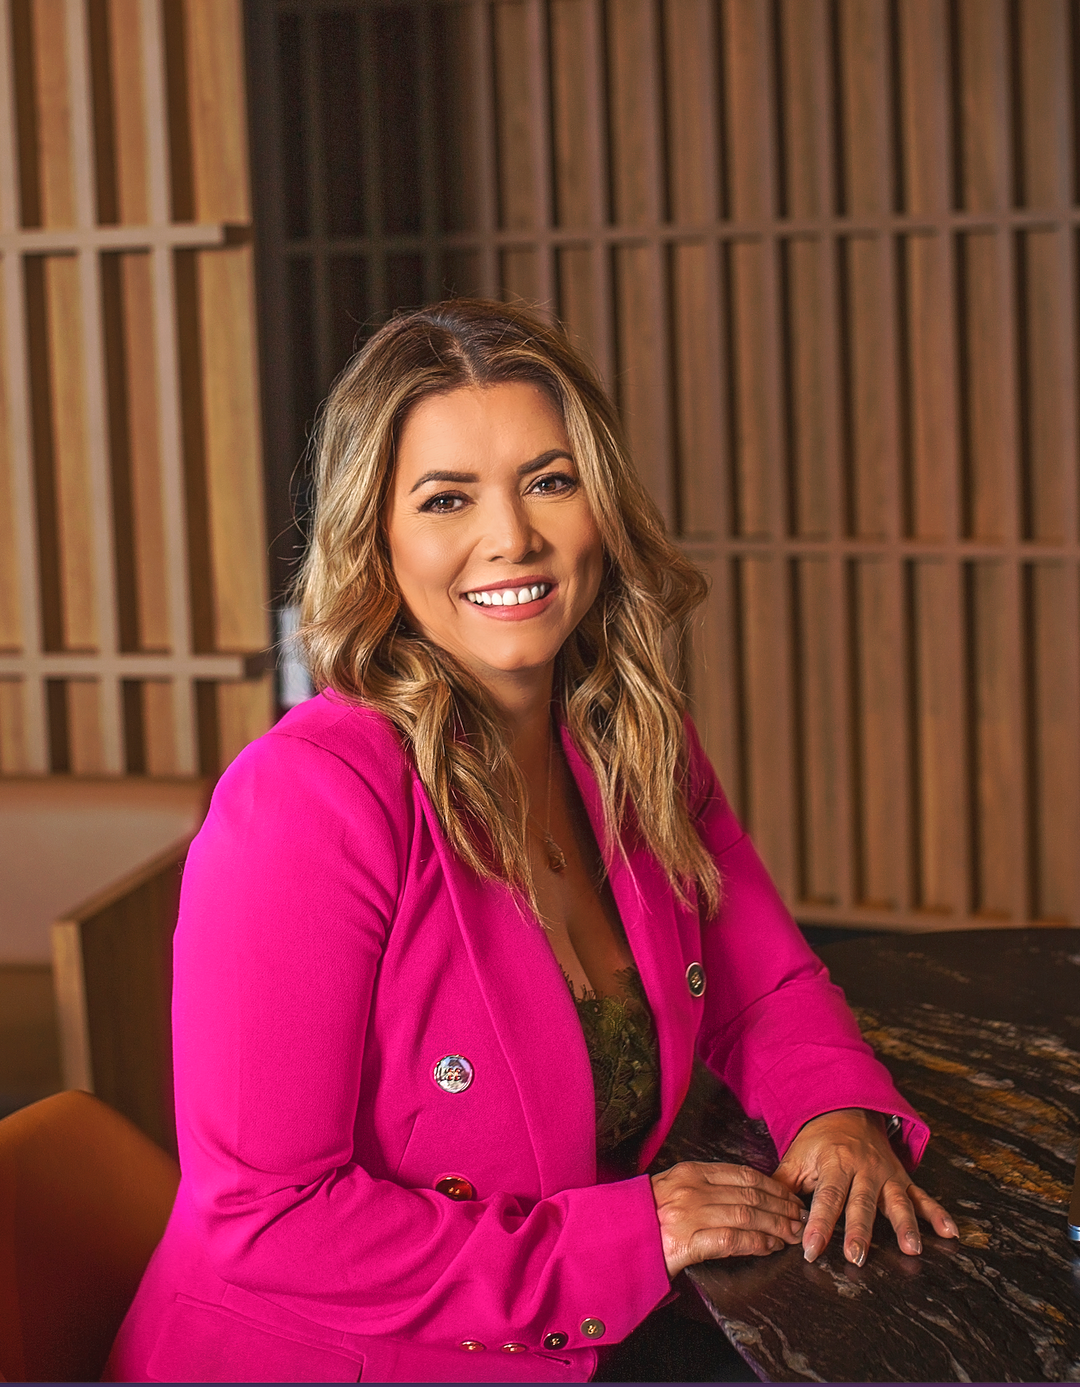 Julia Mann Lash Trainer sitting at a table and smiling into the camera wearing a bright pink blazer